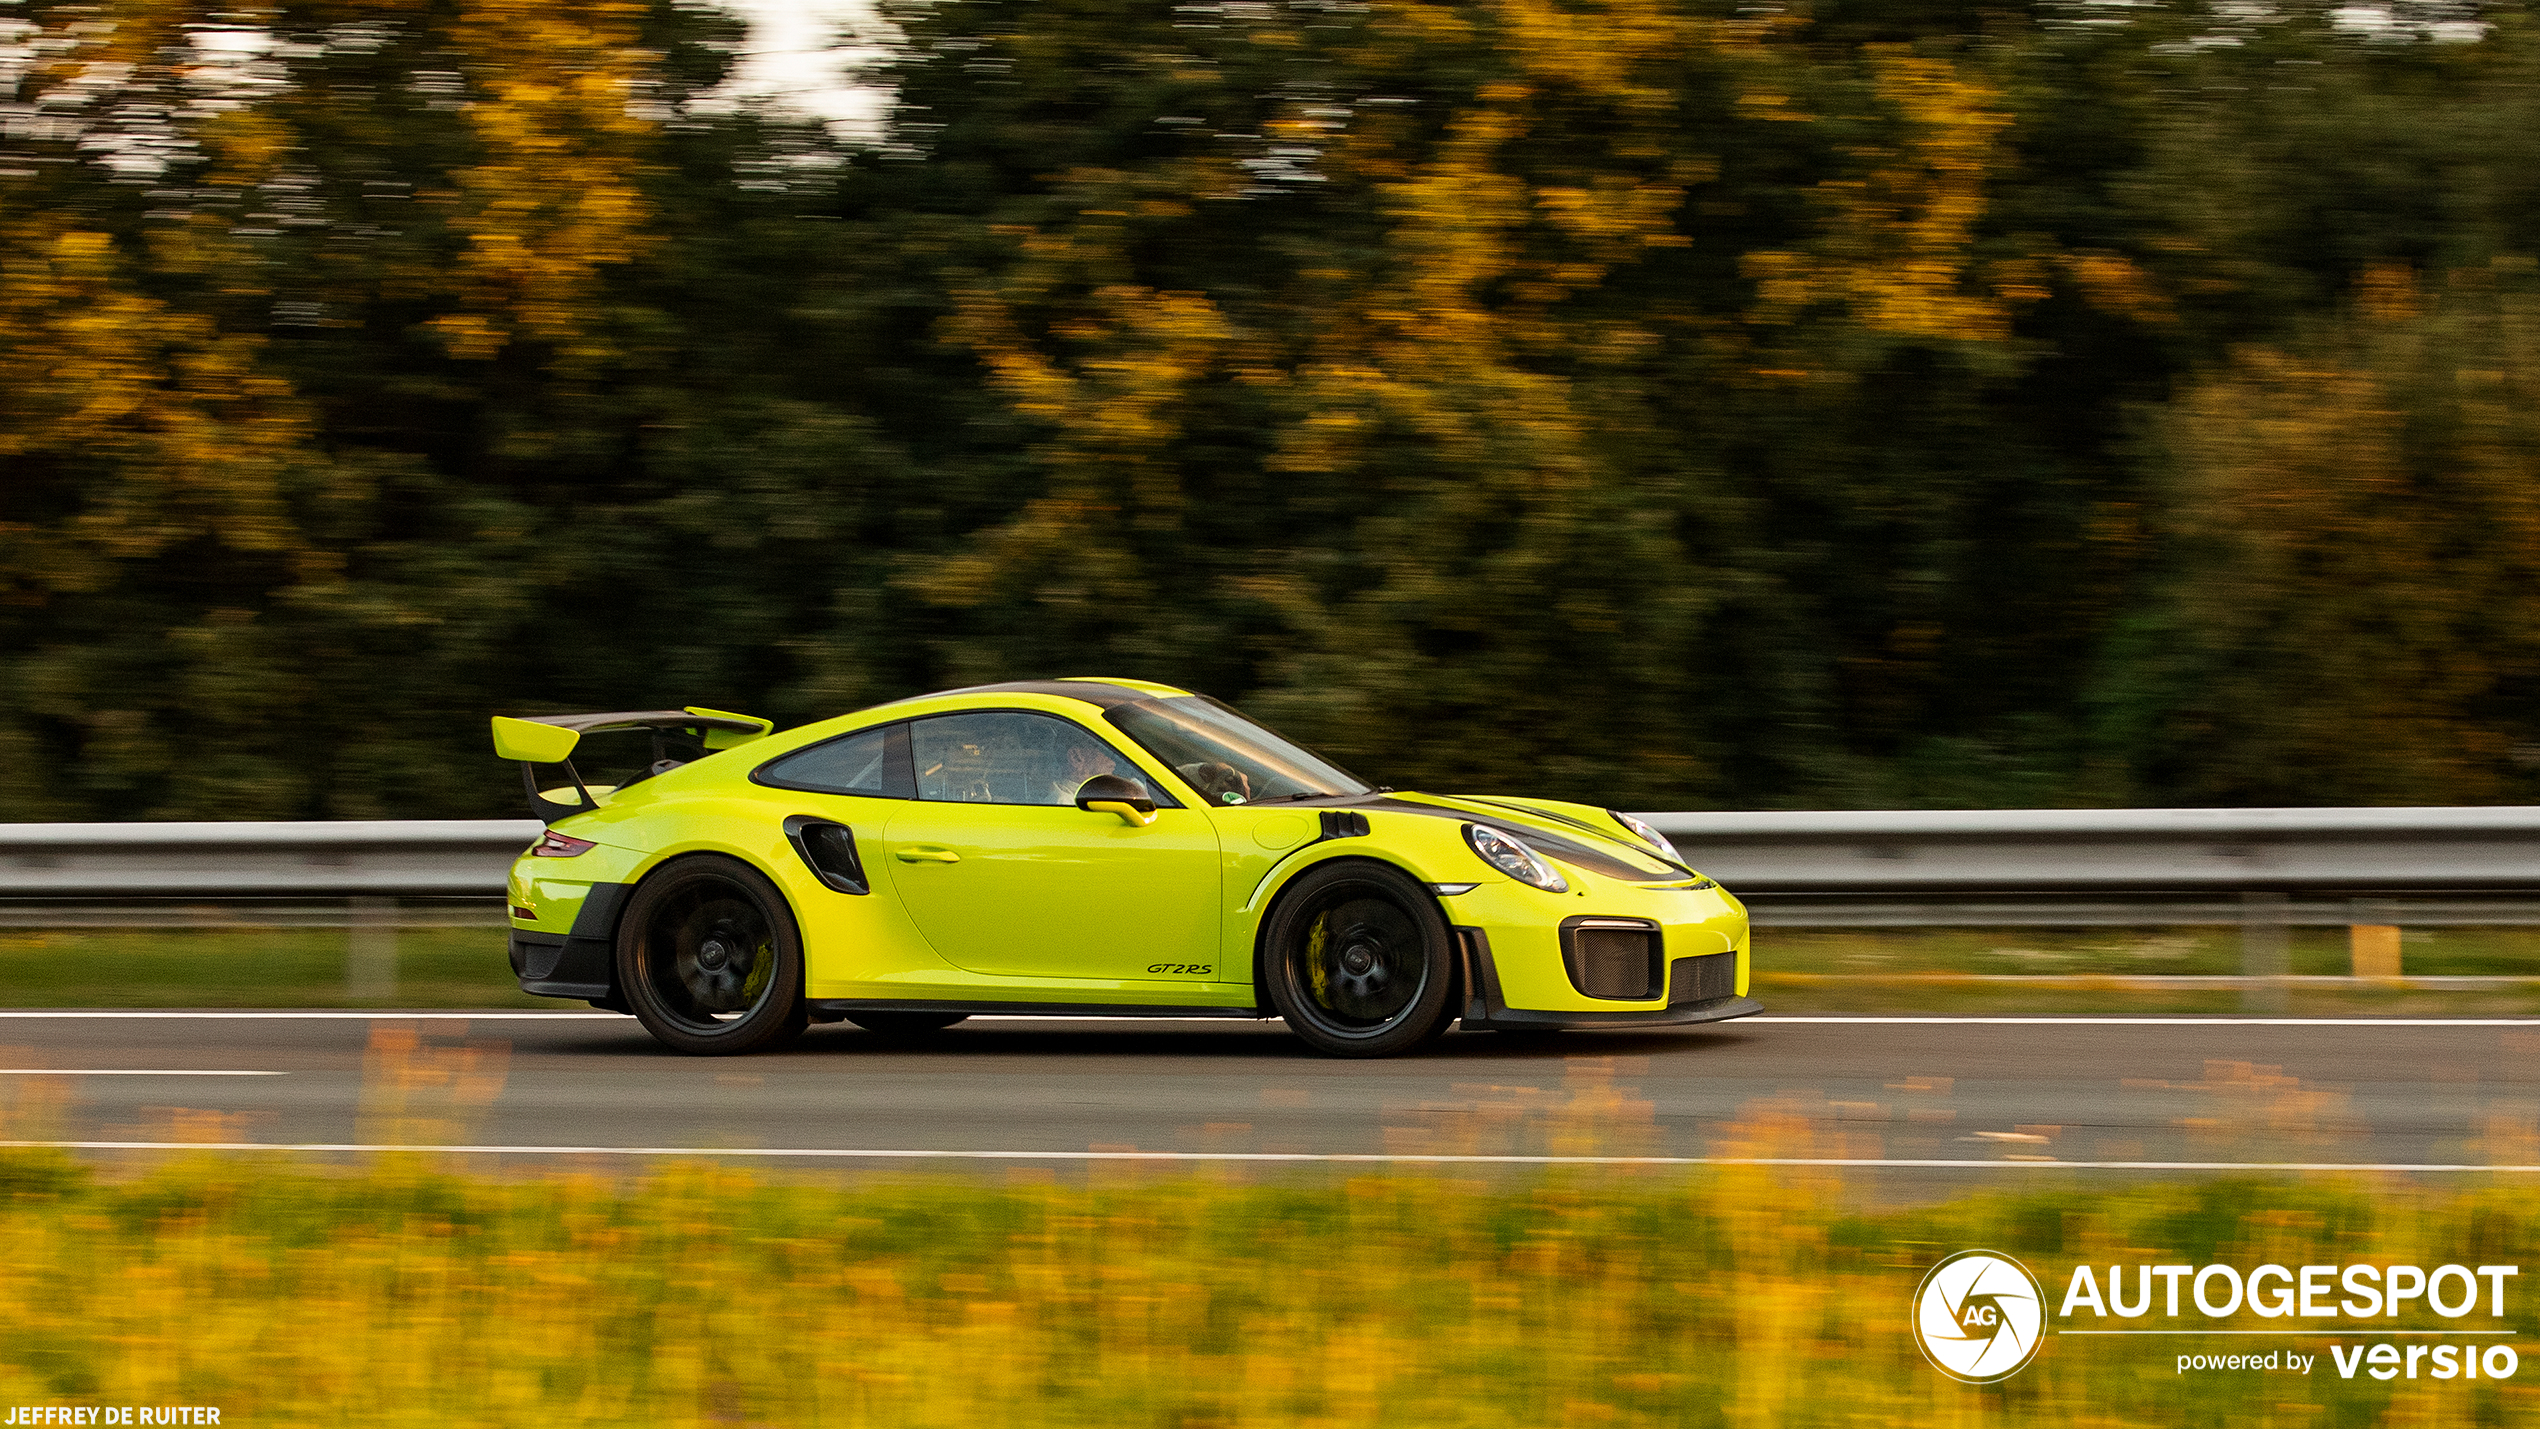 A pretty cool GT2 RS races down the highway